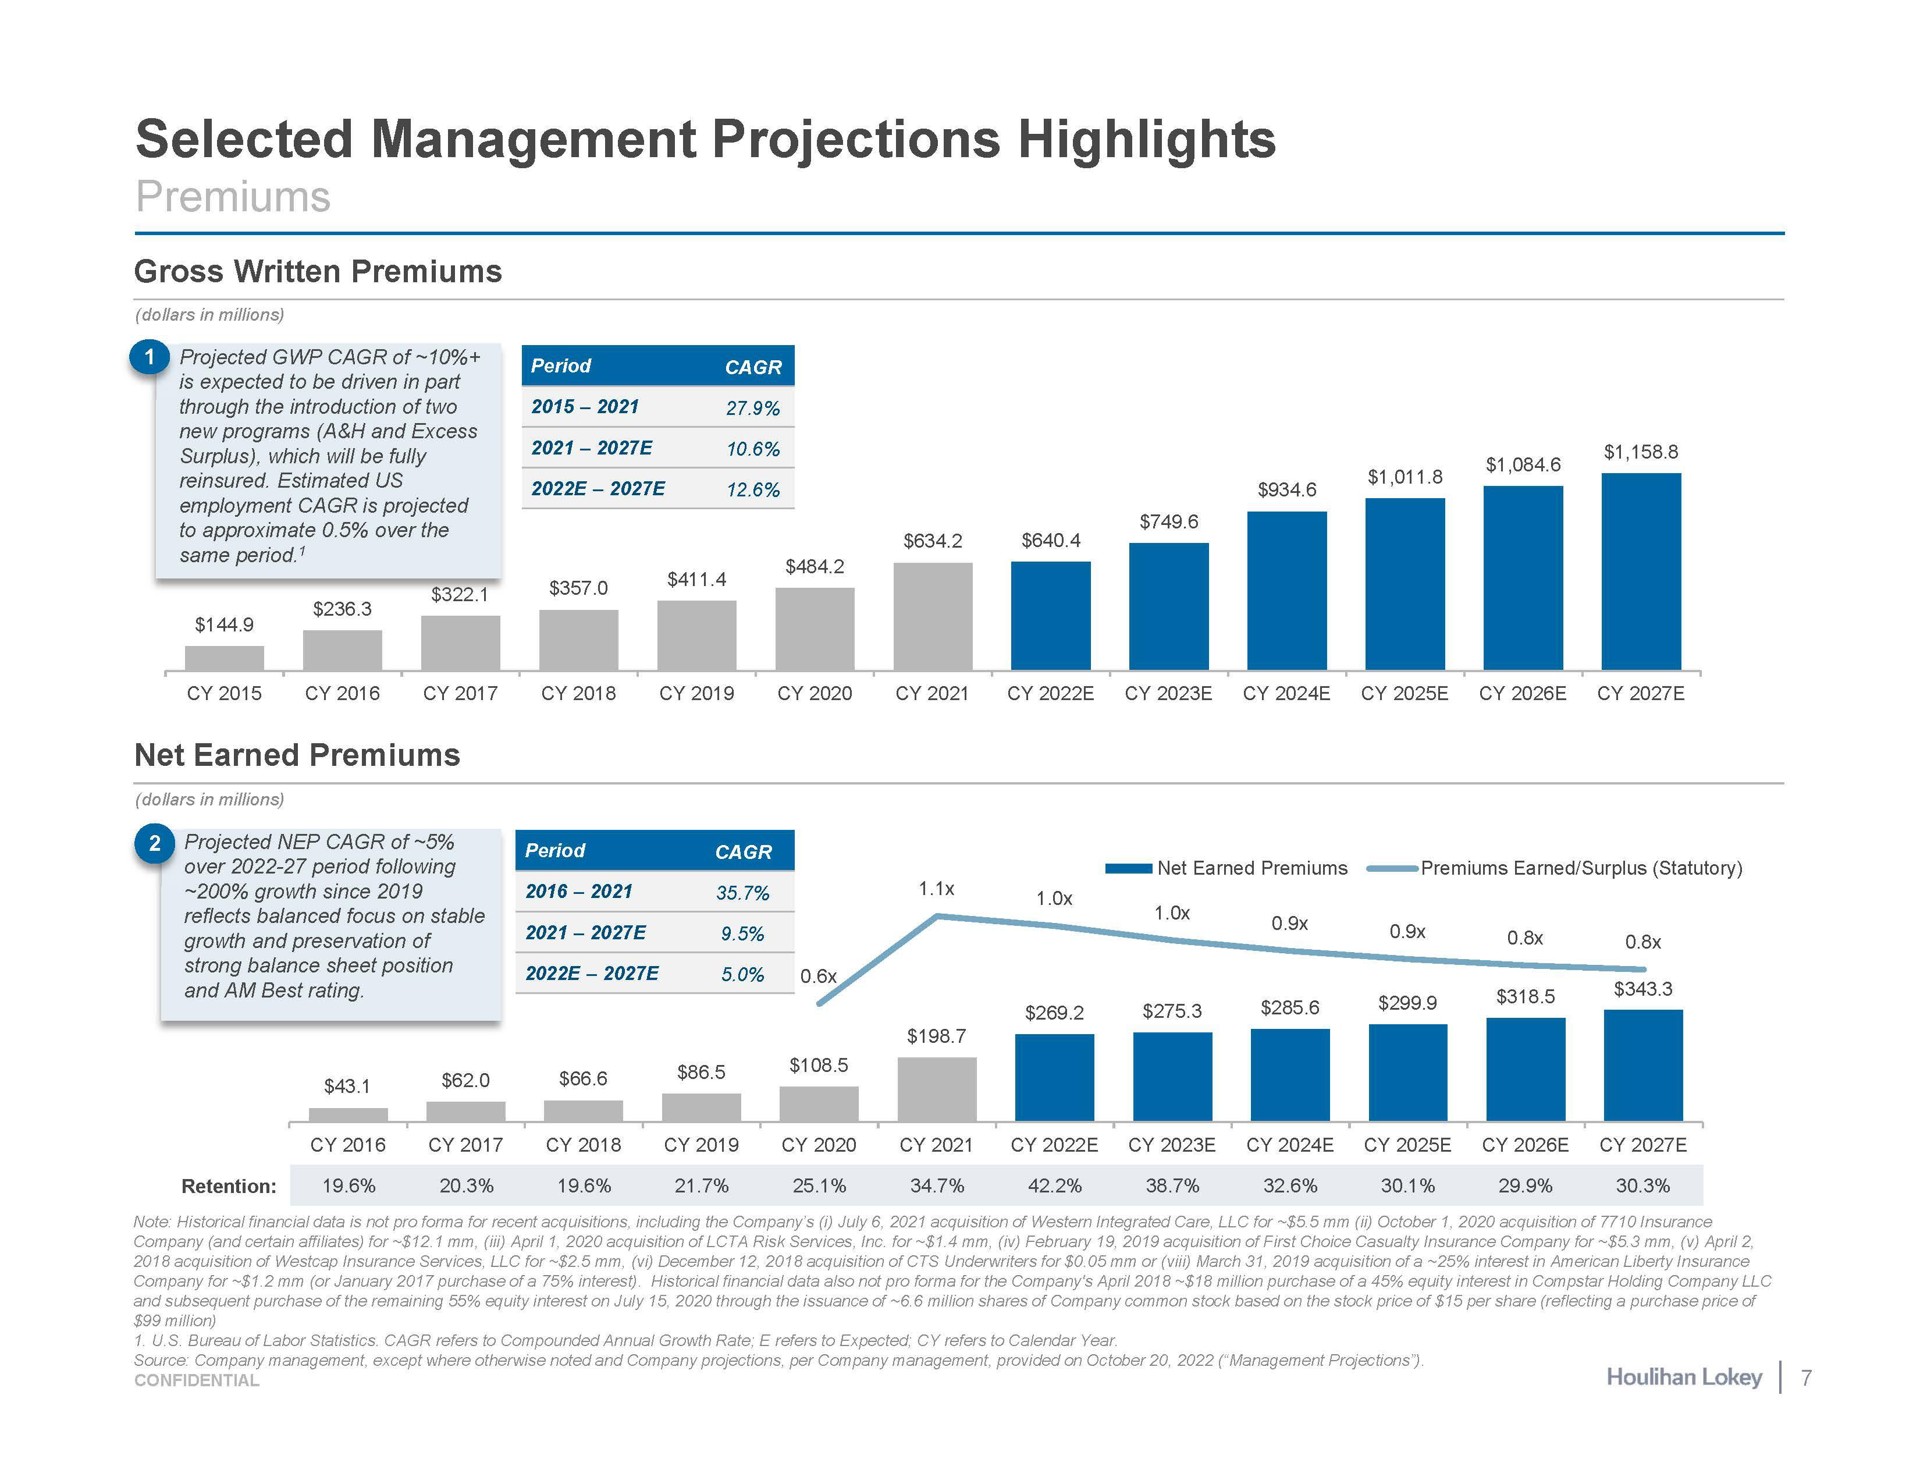 selected management projections highlights | Houlihan Lokey